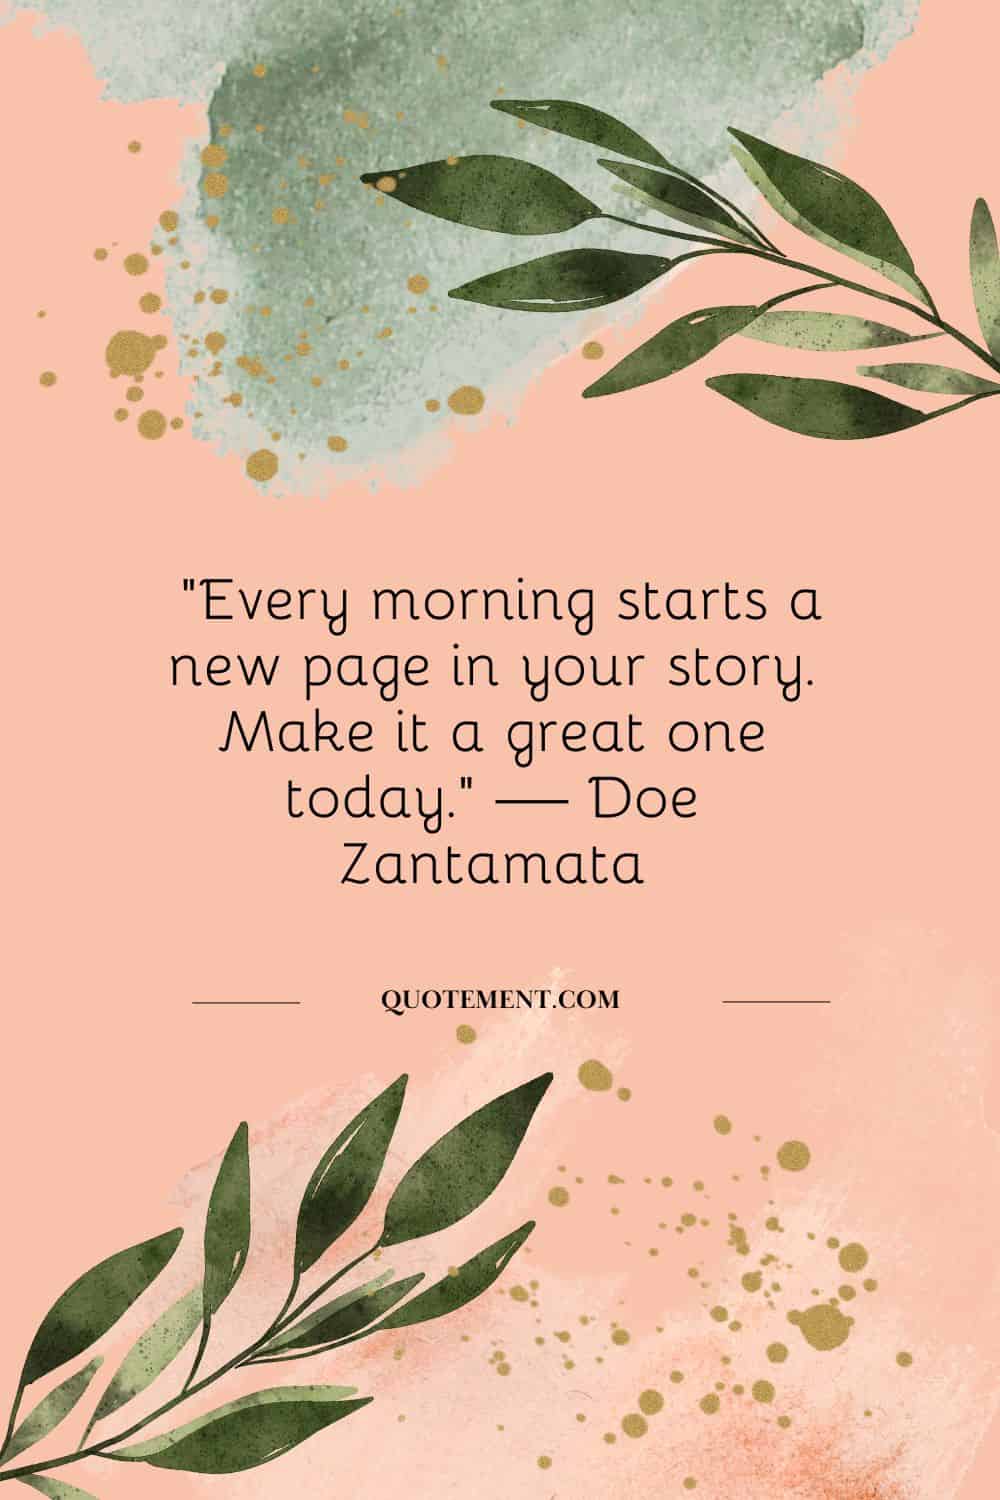 “Every morning starts a new page in your story. Make it a great one today.” — Doe Zantamata